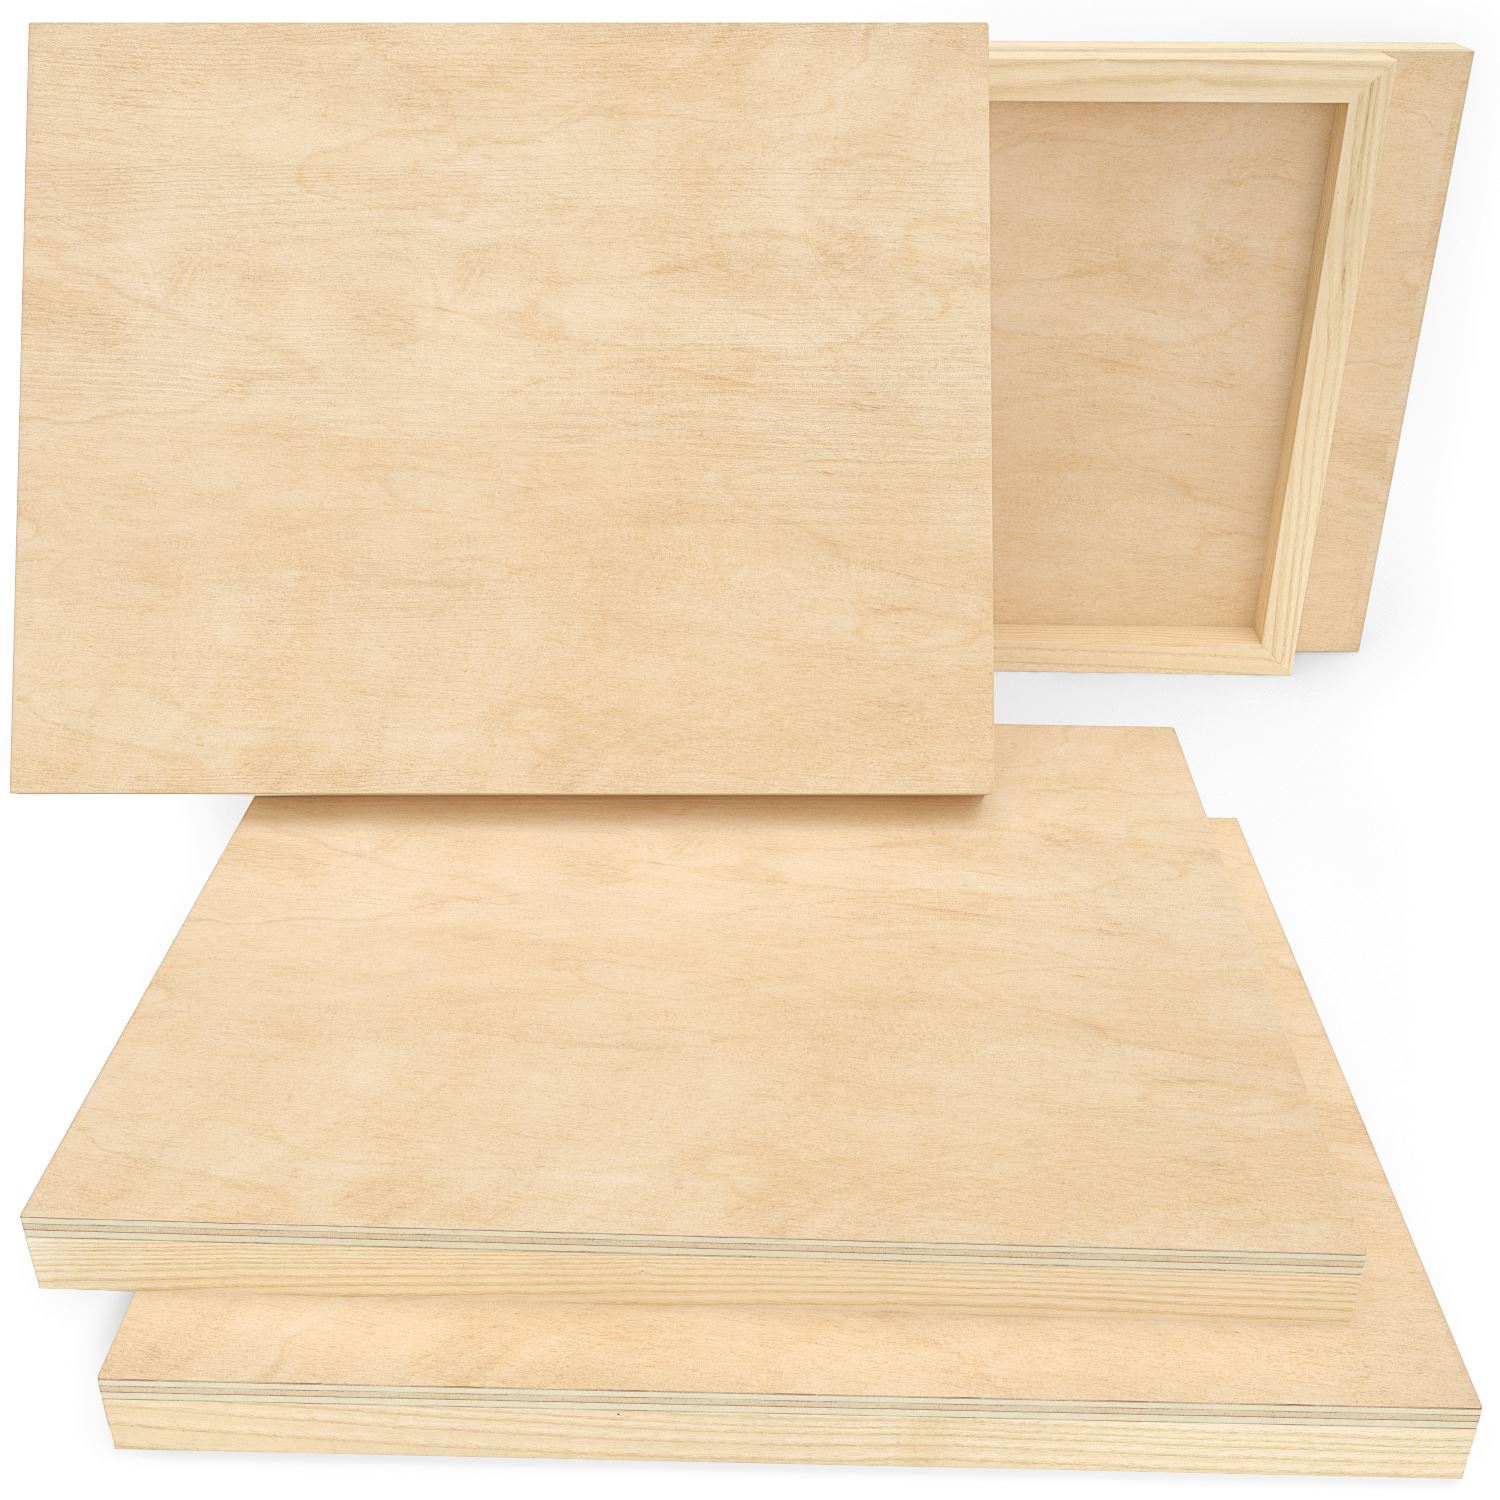 Arteza Wooden Canvas Board, 8x10 inch, Pack of 5, Birch Wood, Cradled Artist Wood Panels for Painting, Encaustic Art, Wood Burning, Pouring, Use